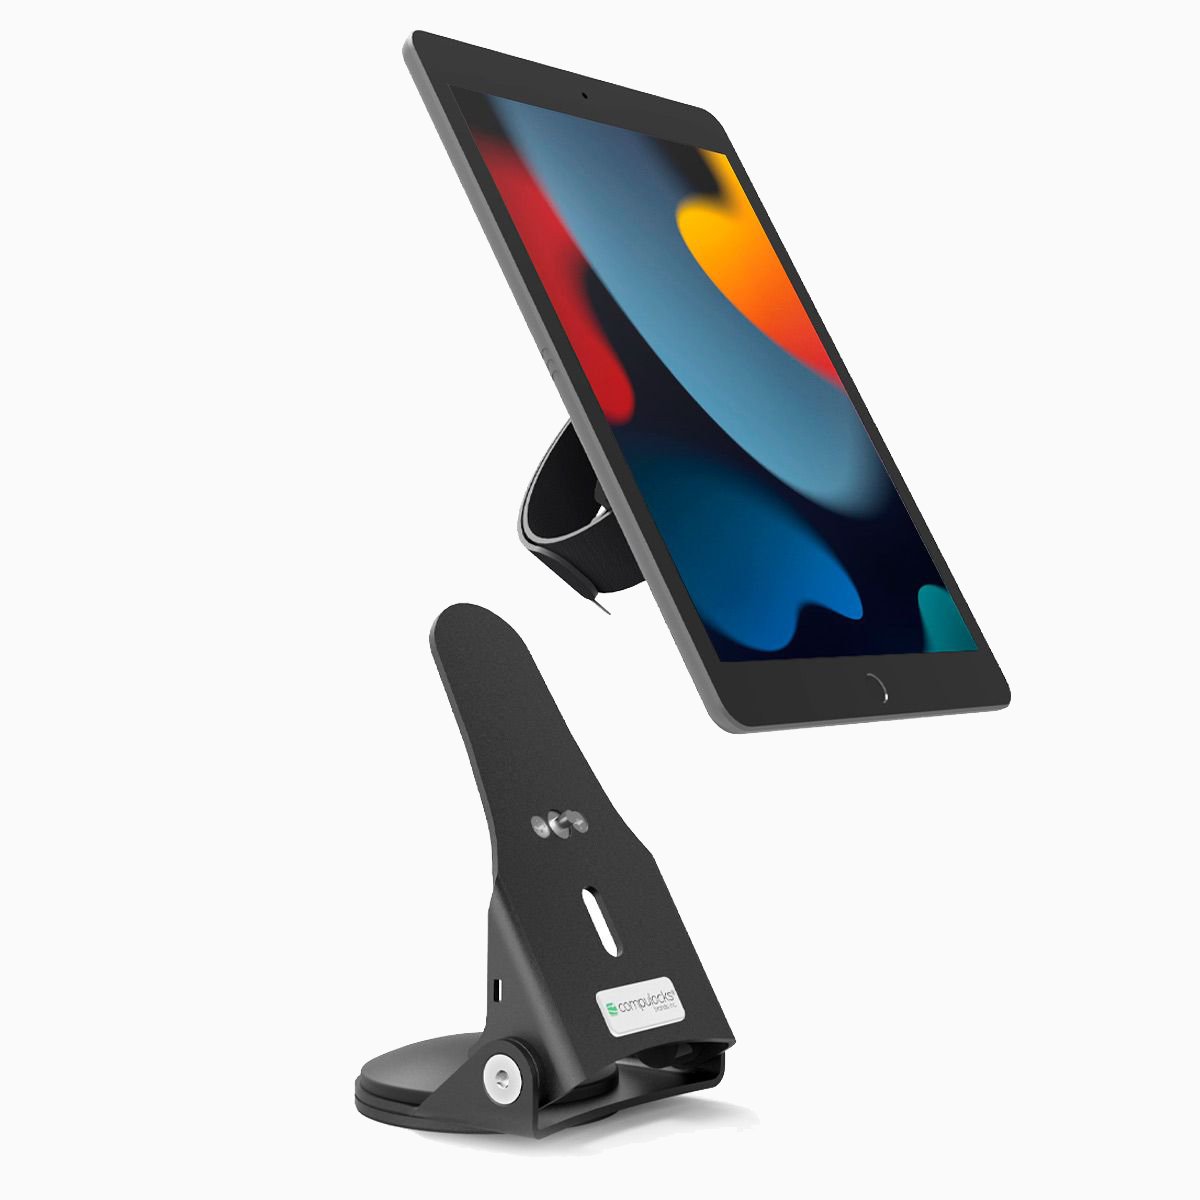 Maclocks Hand Grip and Dock Tablet Stand